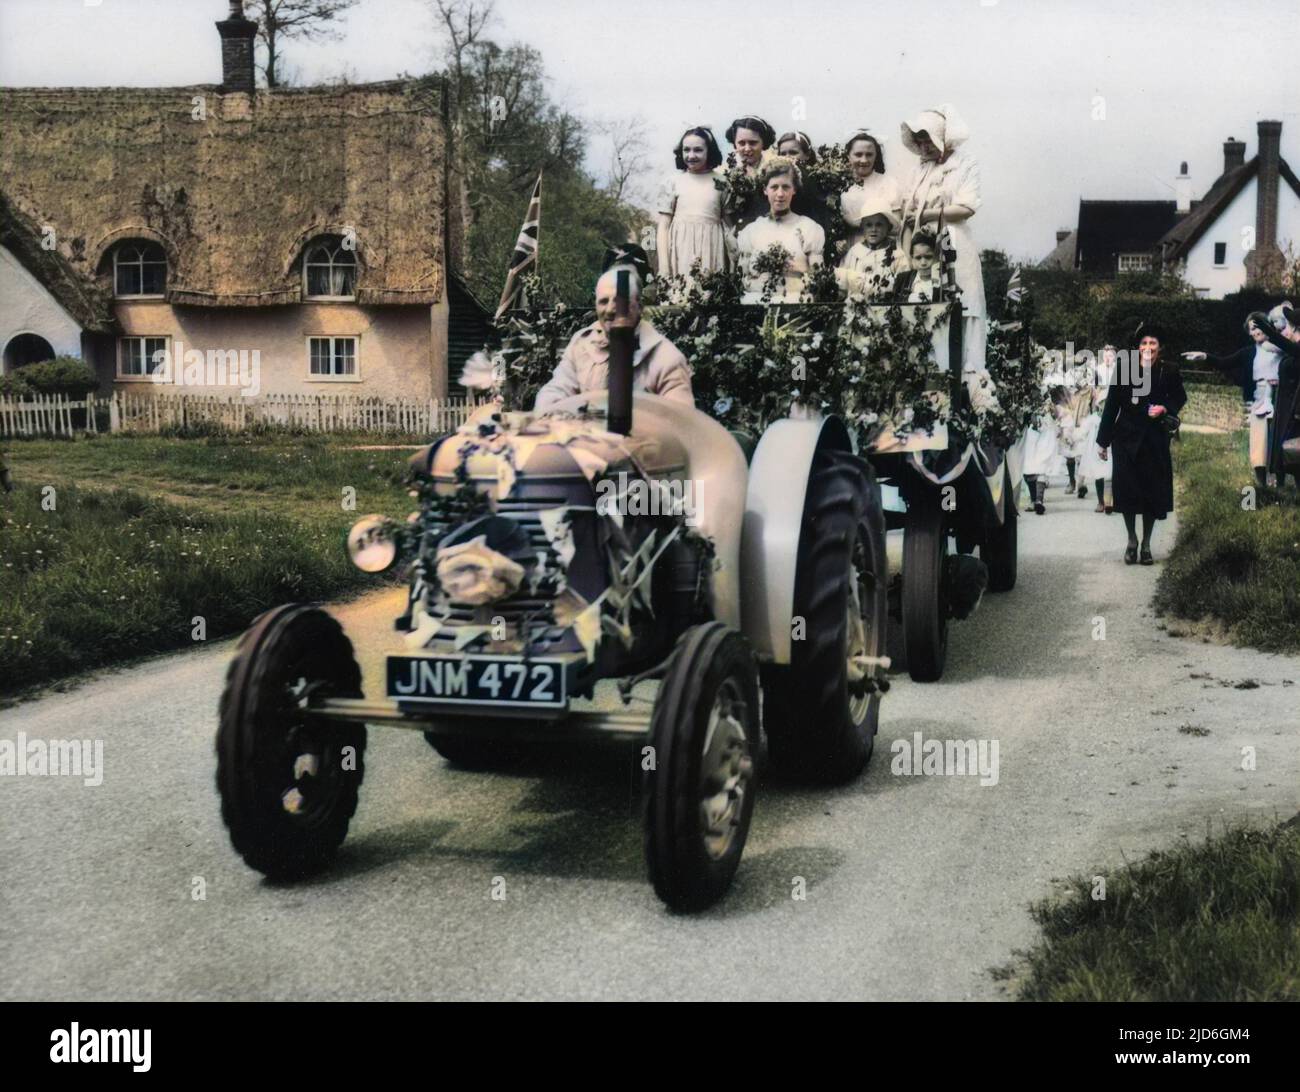 Traditional May Day festivities at Ickwell, Bedfordshire, England. Here, the May Queen arrives on the village green in luxury - by tractor! Colourised version of : 10184372       Date: 1950s Stock Photo